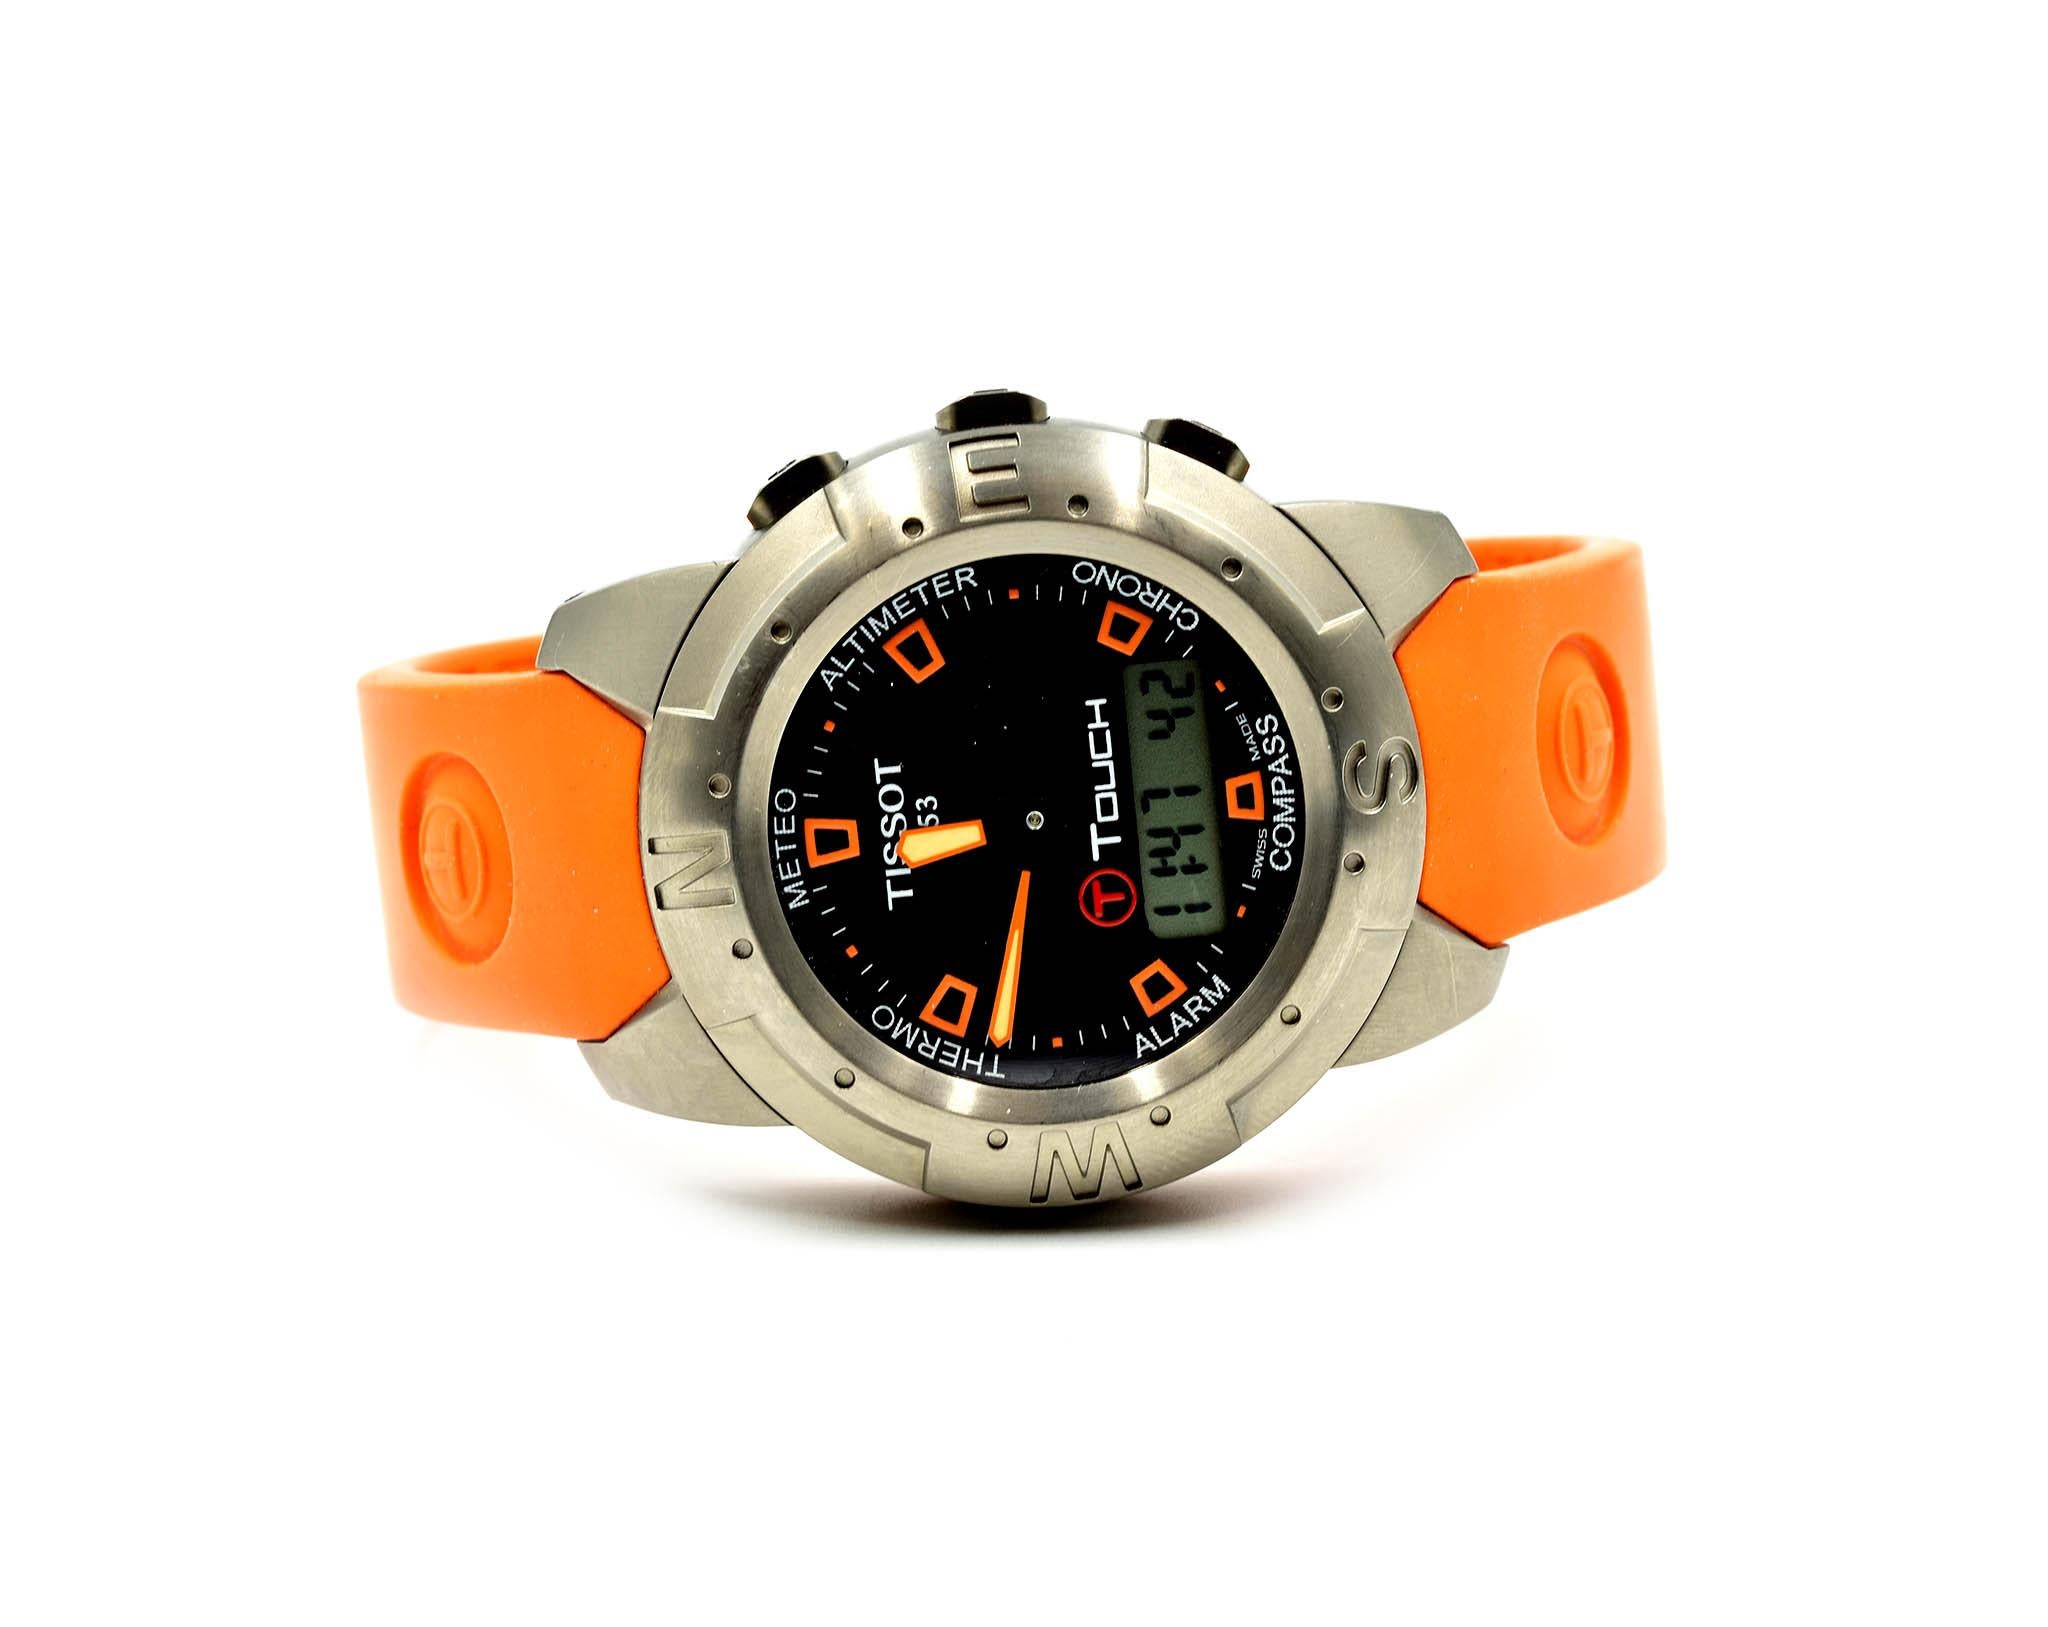 Movement: quartz
Function: EOL, meteo, altimeter, chrono, compass, thermo, 2 alarms, second time zone, perpetual calendar and backlight functions
Case: round 43.30mm x 42.70mm titanium case with rotating bezel, scratch resistant sapphire crystal,